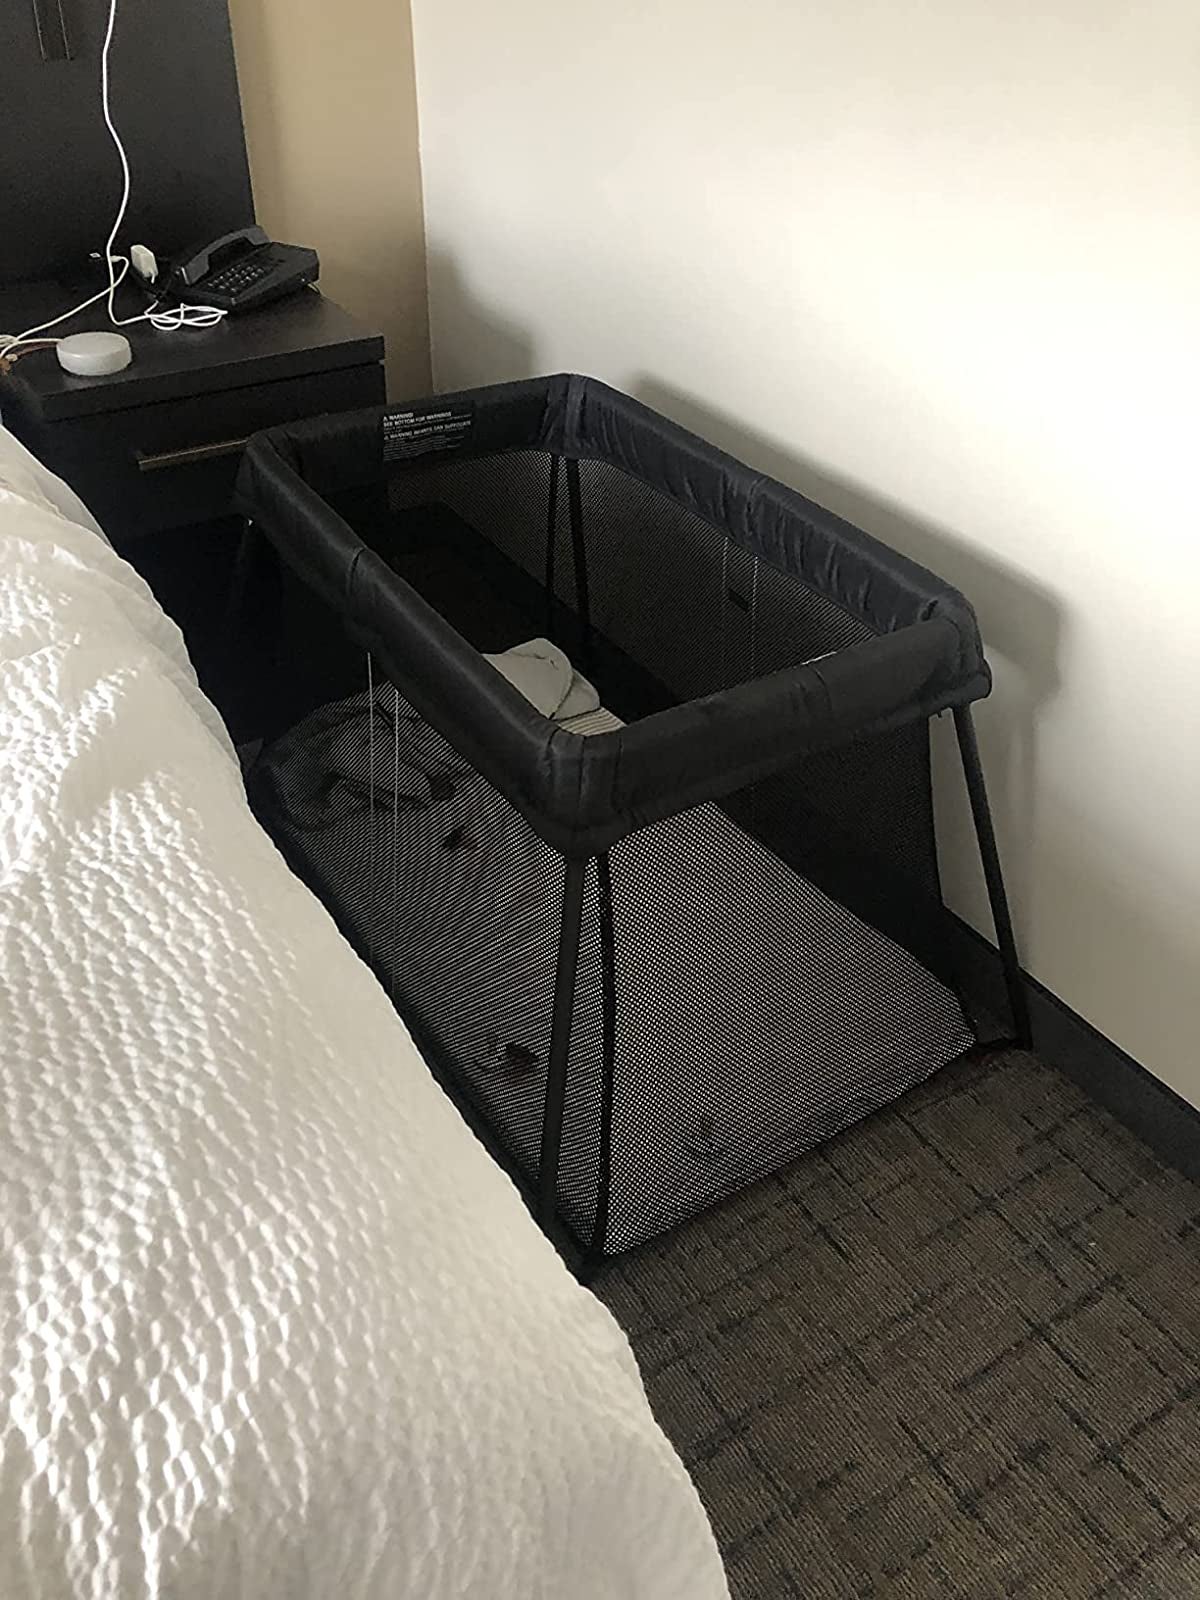 hotel customer picture of the travel baby crib in between a hotel bed and wall